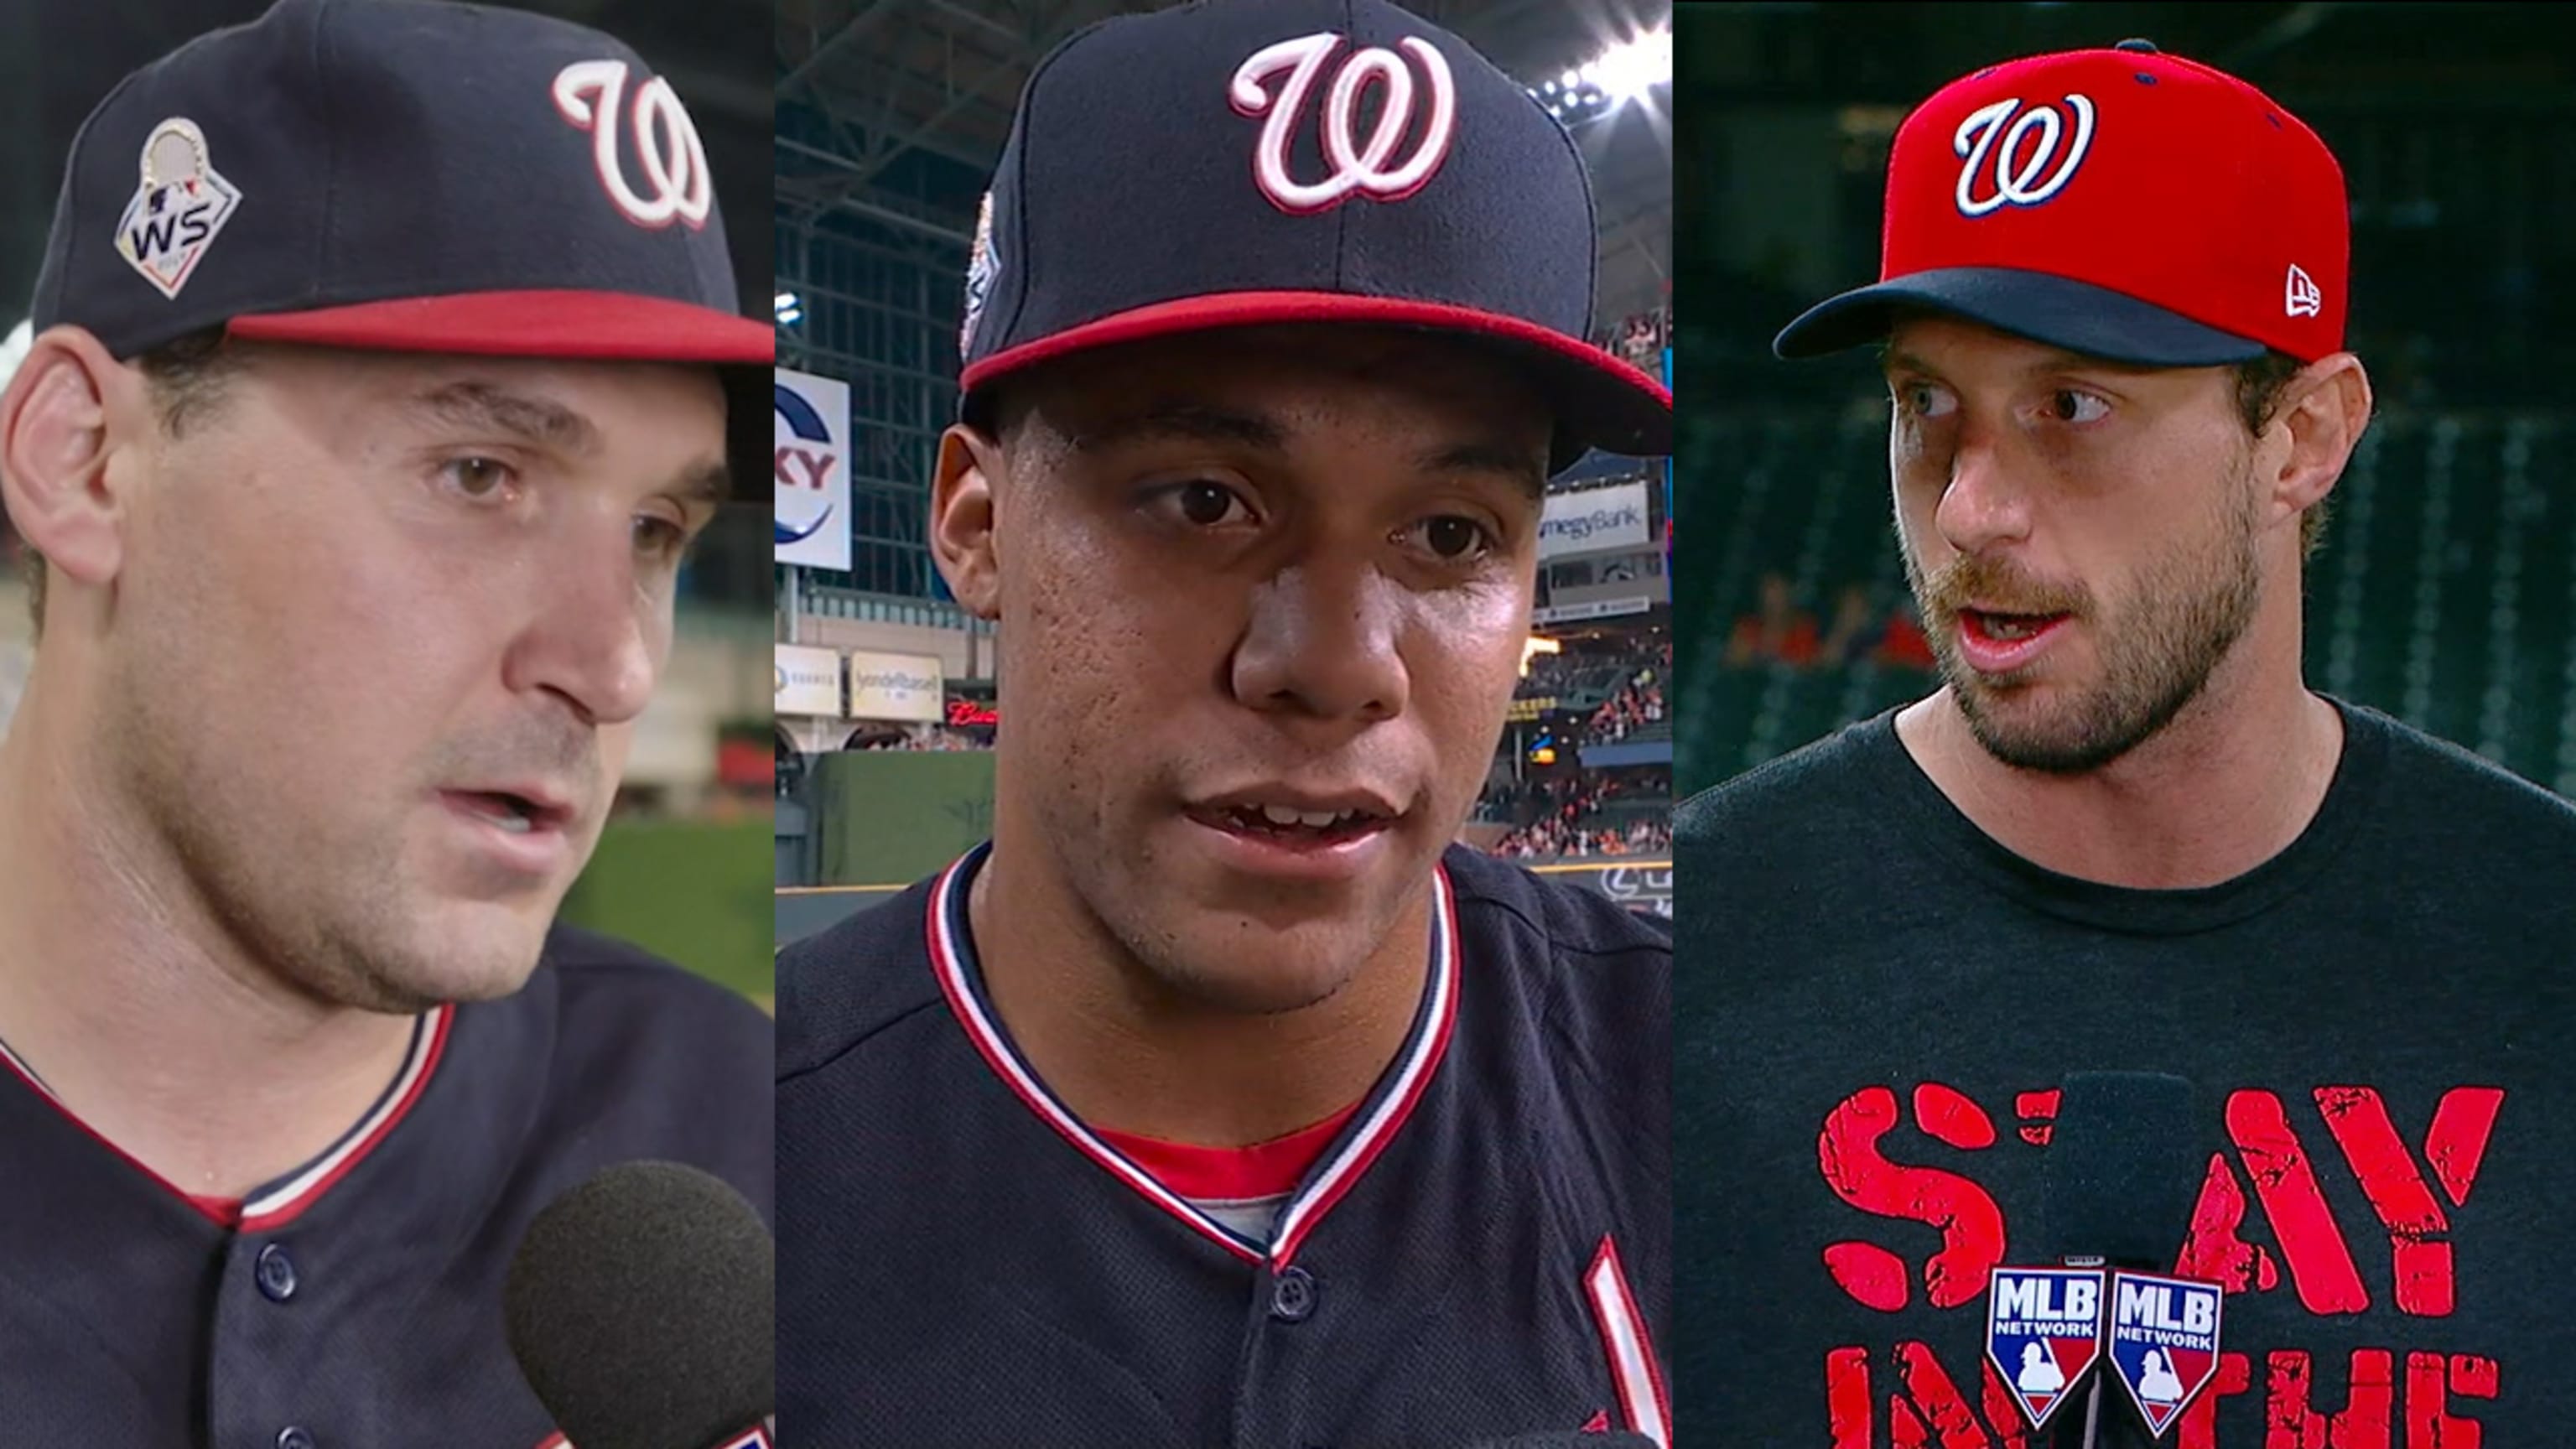 Washington Nationals World Series: Soto leads the charge in Game 1 win